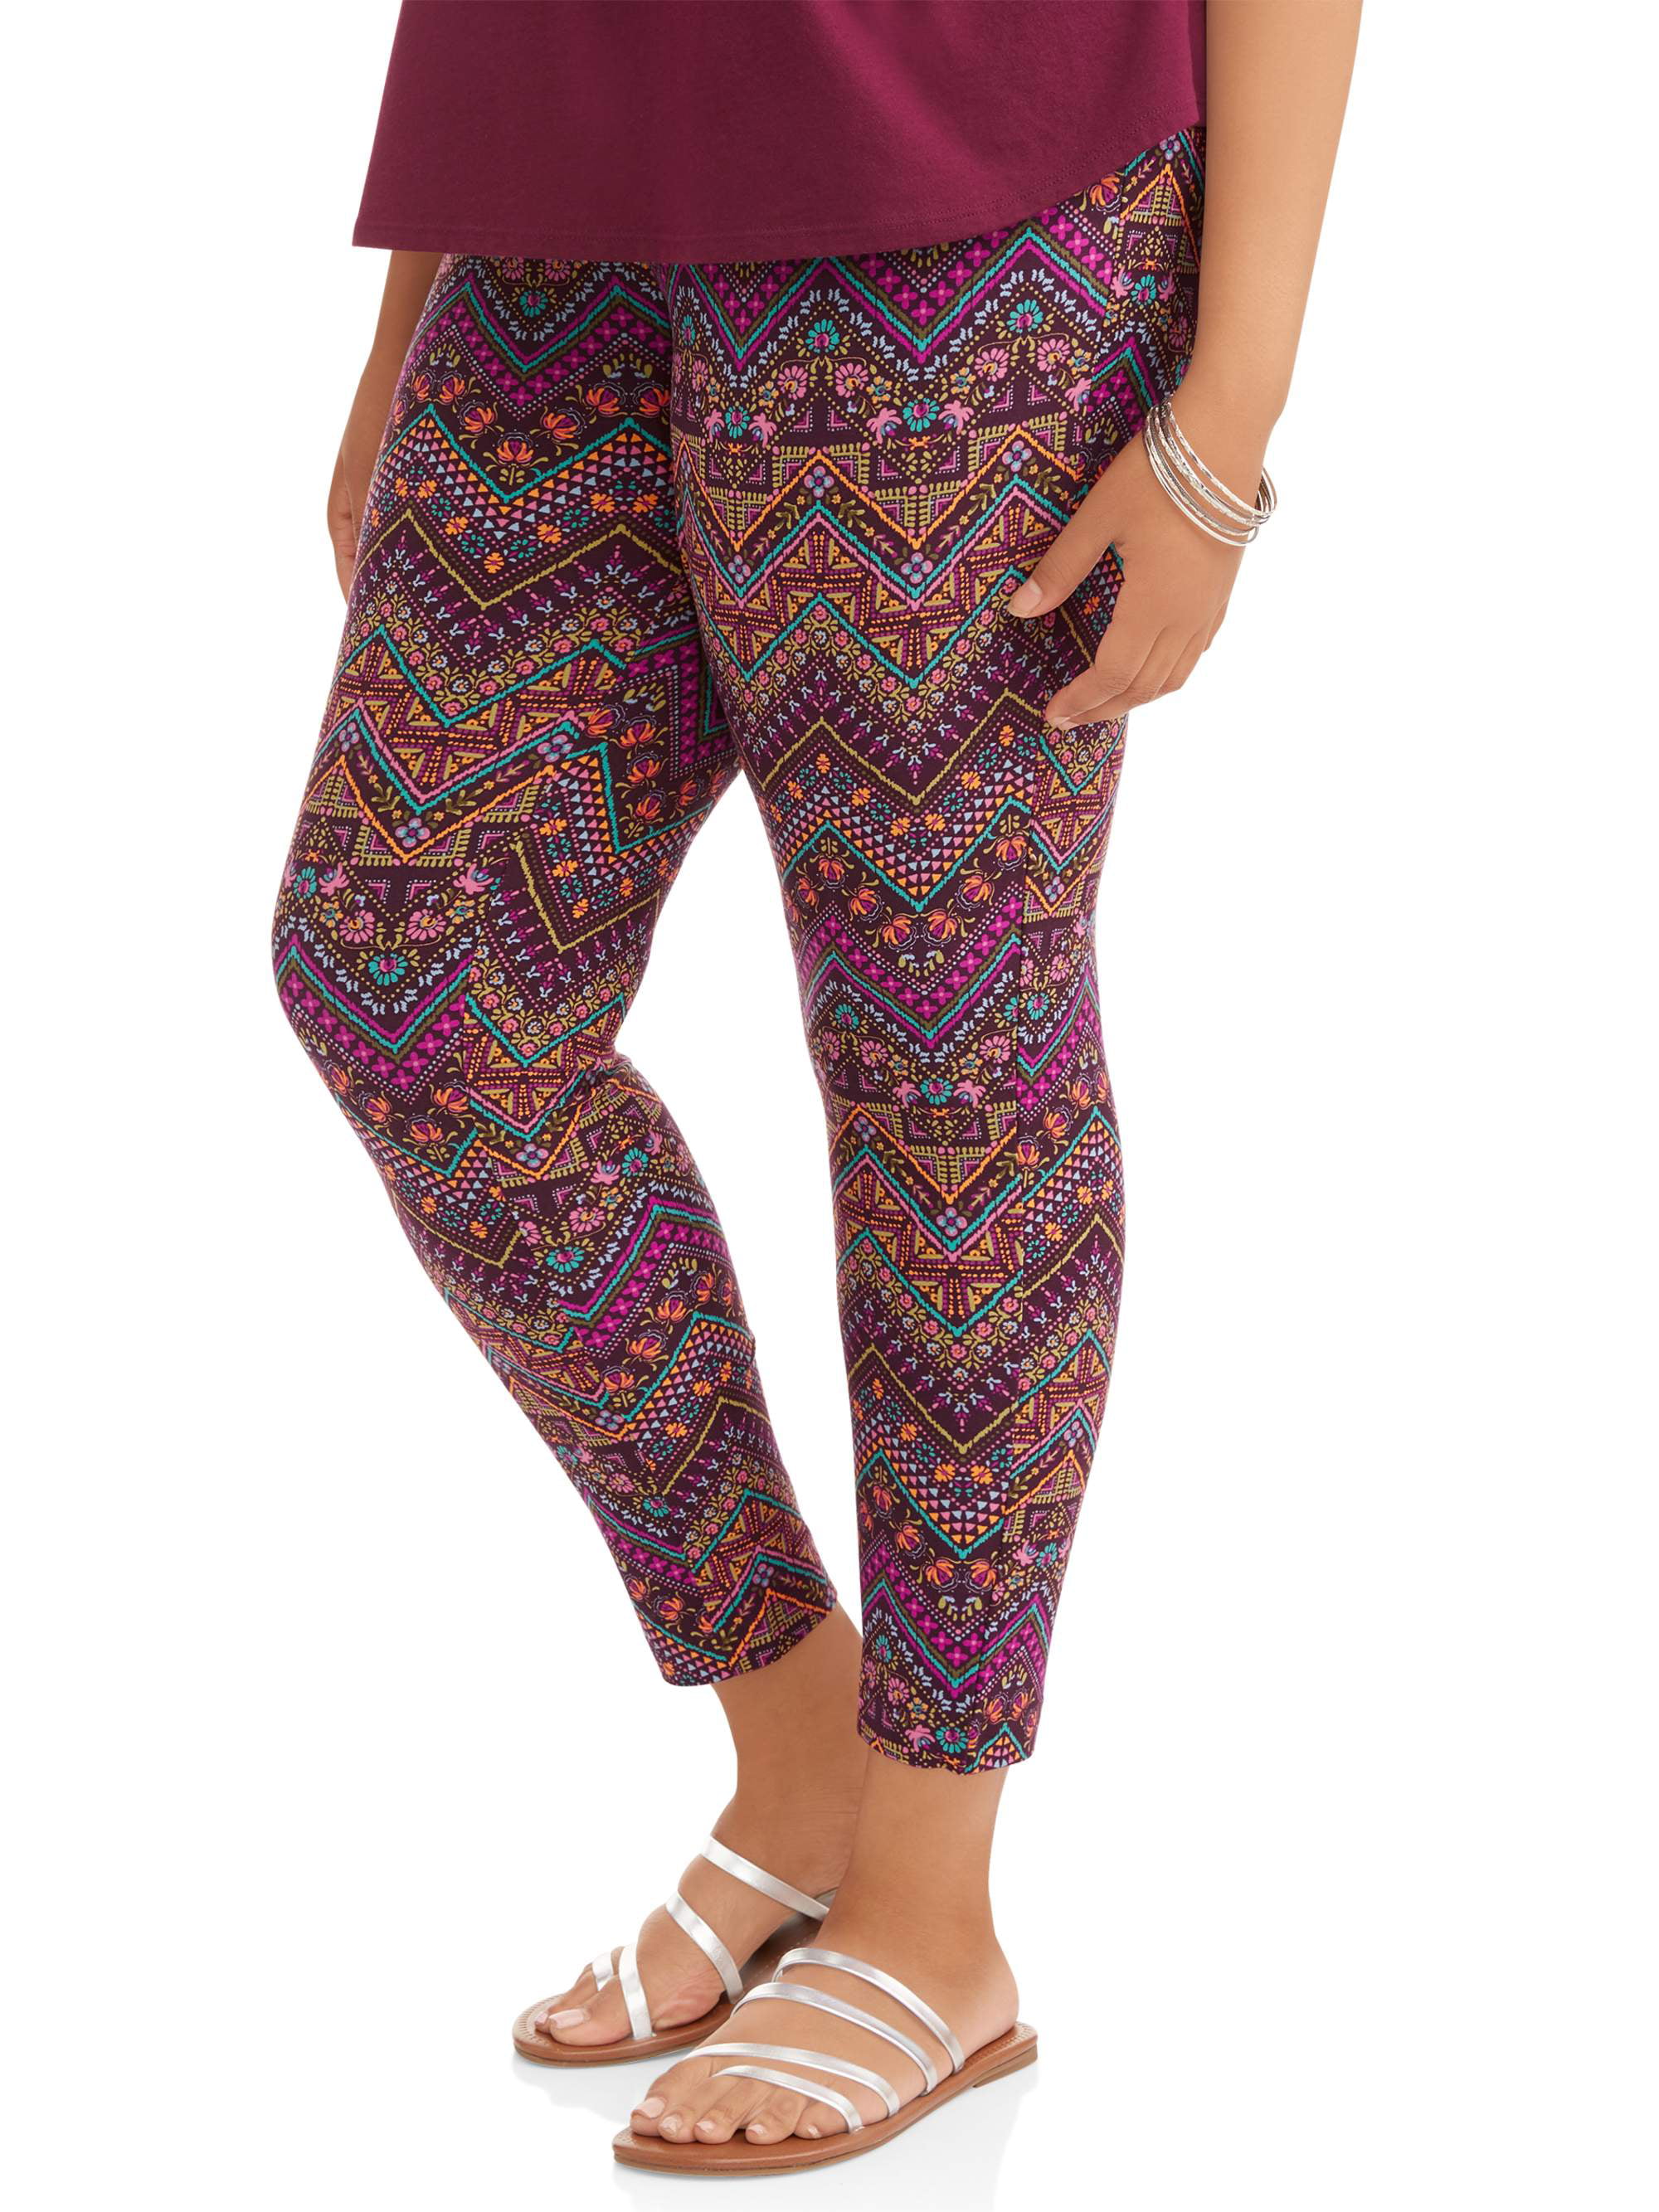 Buy Aashish Fabrics Women's Plus Size Relaxed Fit Cotton Leggings -  Multicolor Delights for Comfort and Style (Multicolor, 3XL) at